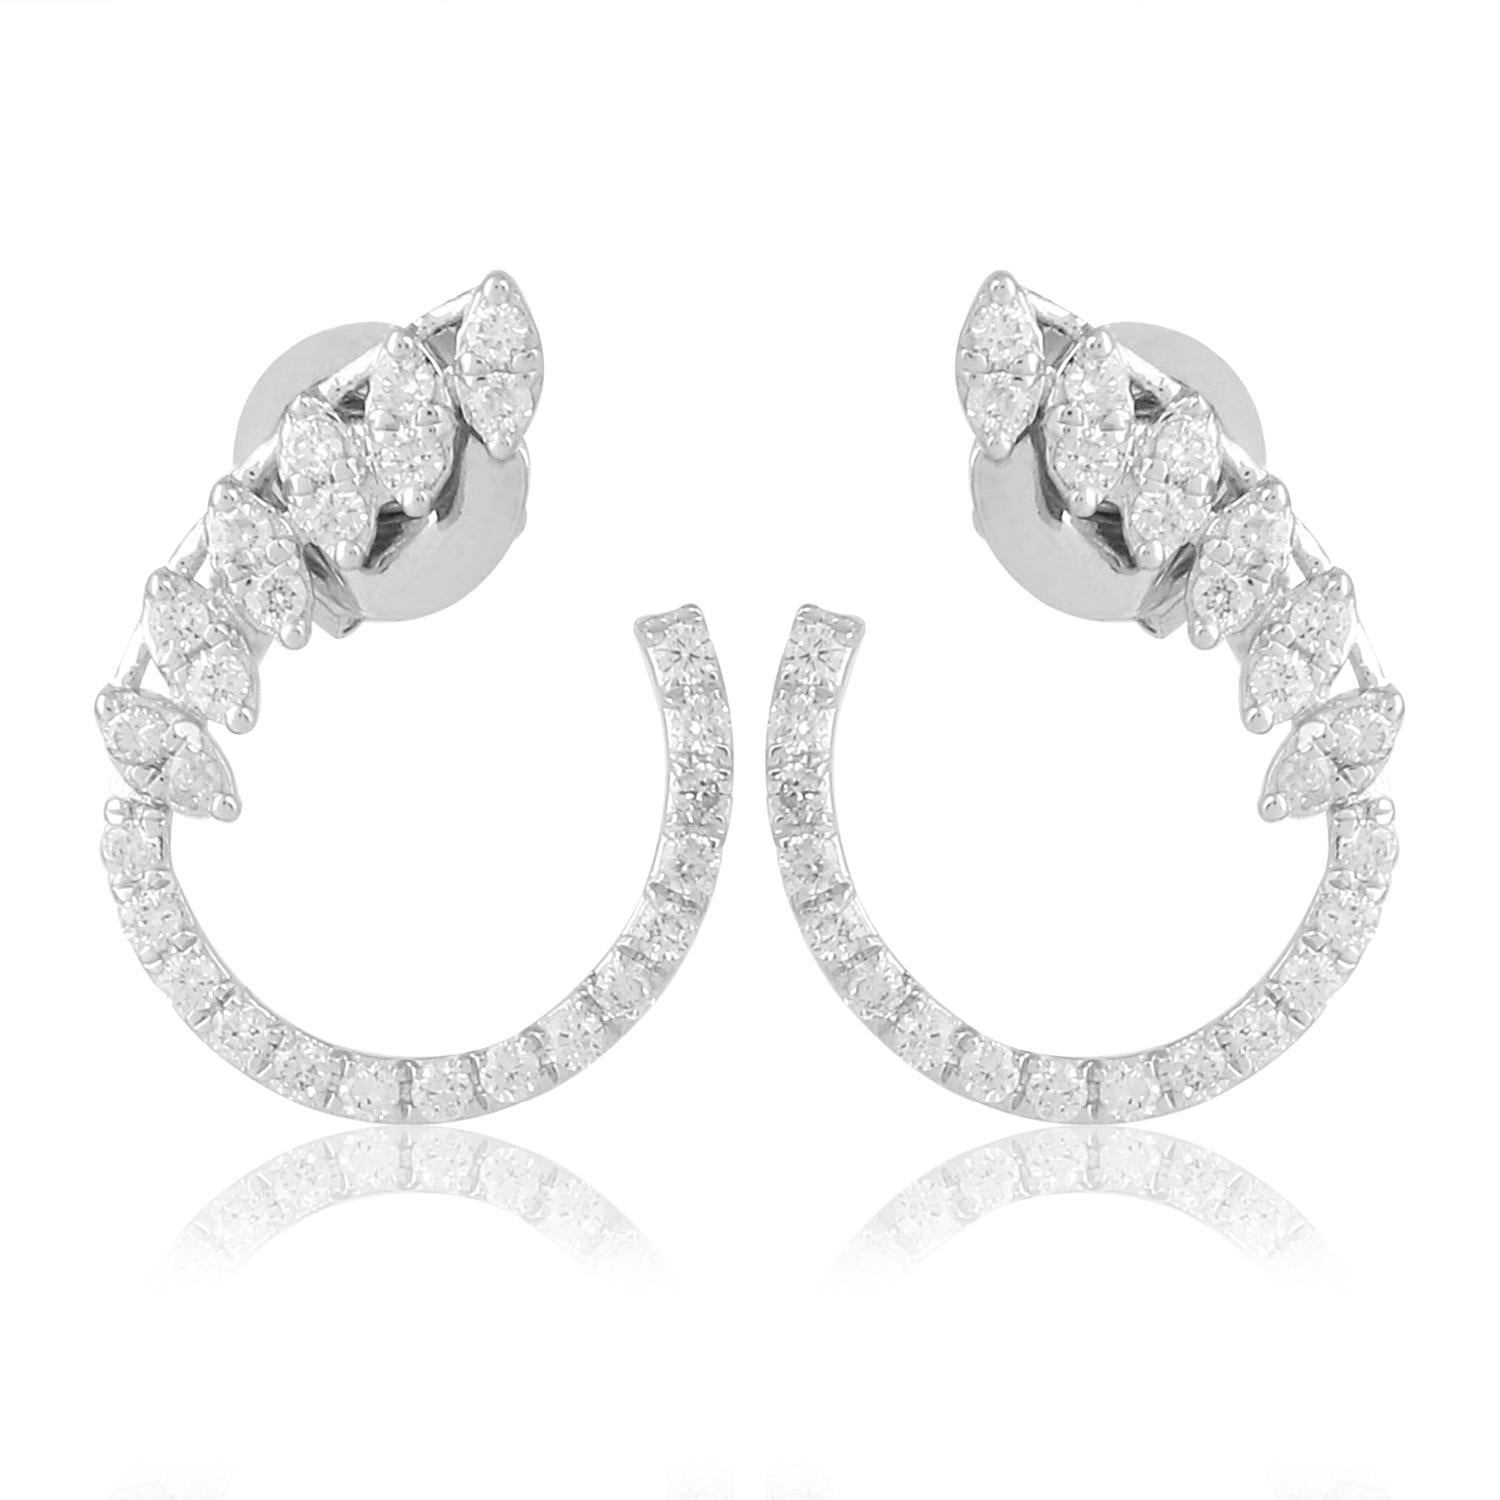 The sleek and minimalist design of these earrings accentuates the natural beauty of the diamonds, allowing them to take center stage. The lustrous 18 karat white gold settings provide the perfect backdrop, enhancing the brilliance of the diamonds